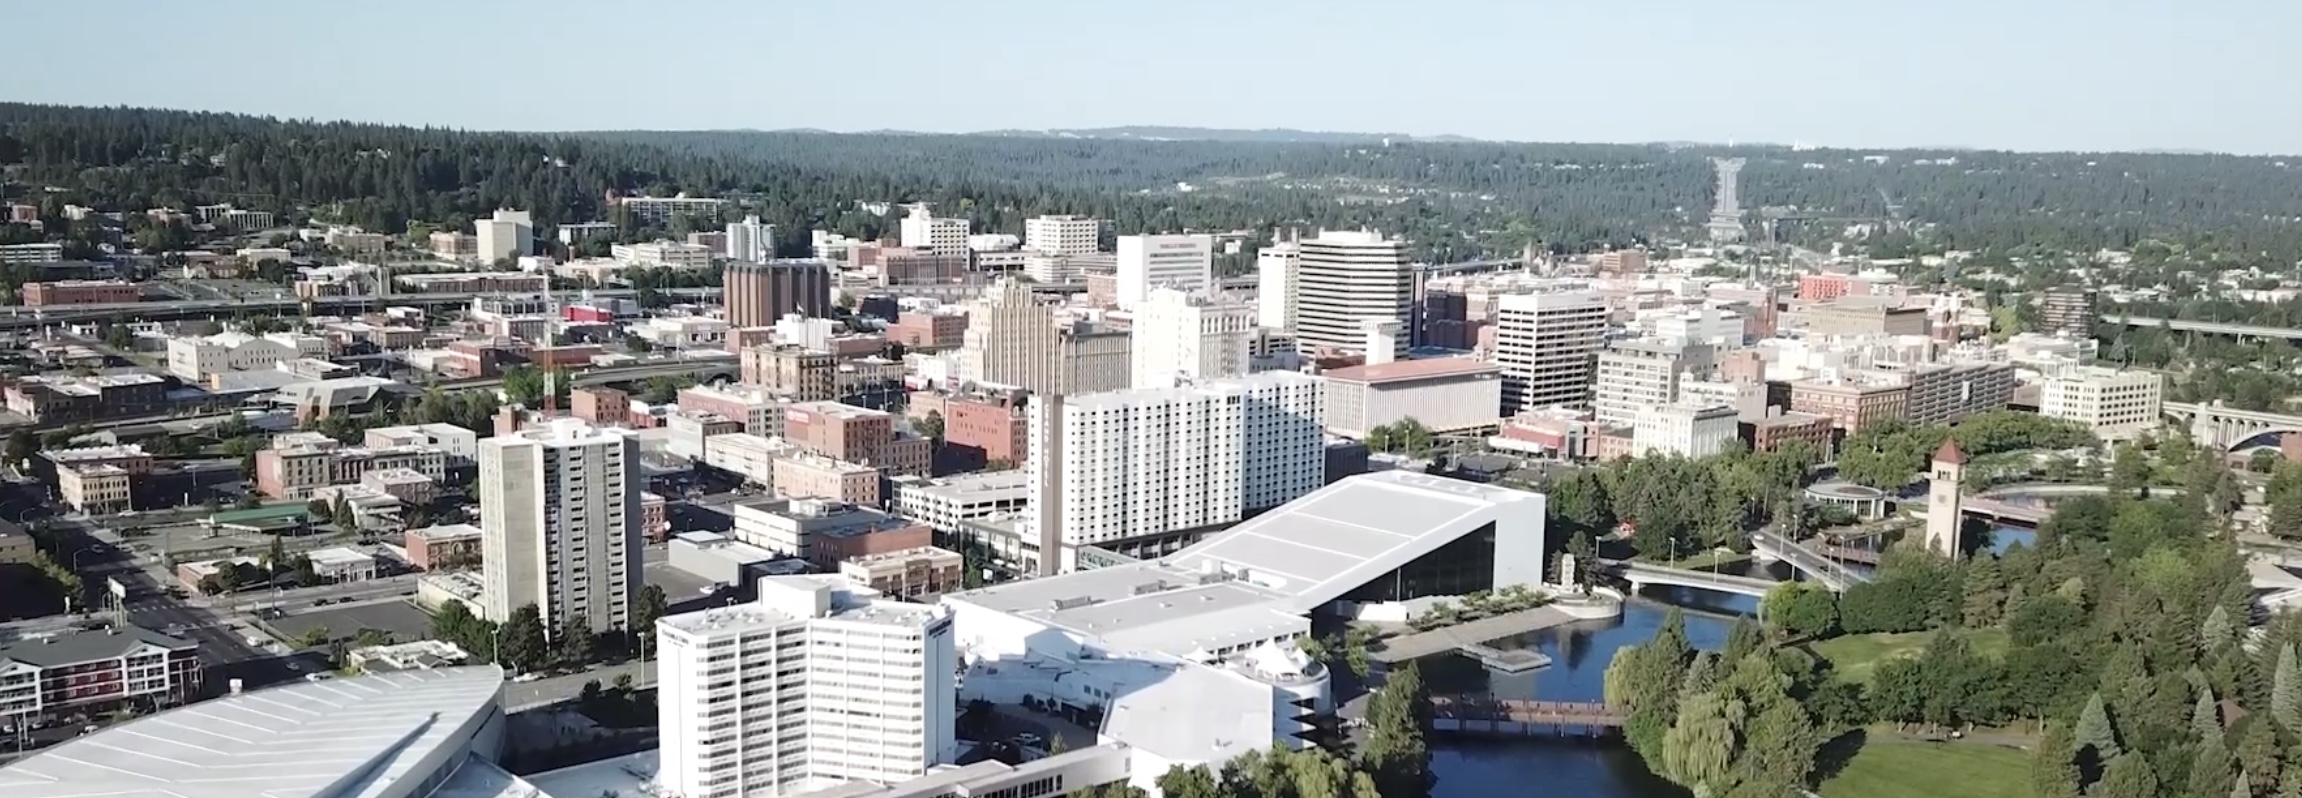 Spokane Business Supporting Local Businesses Aerial View